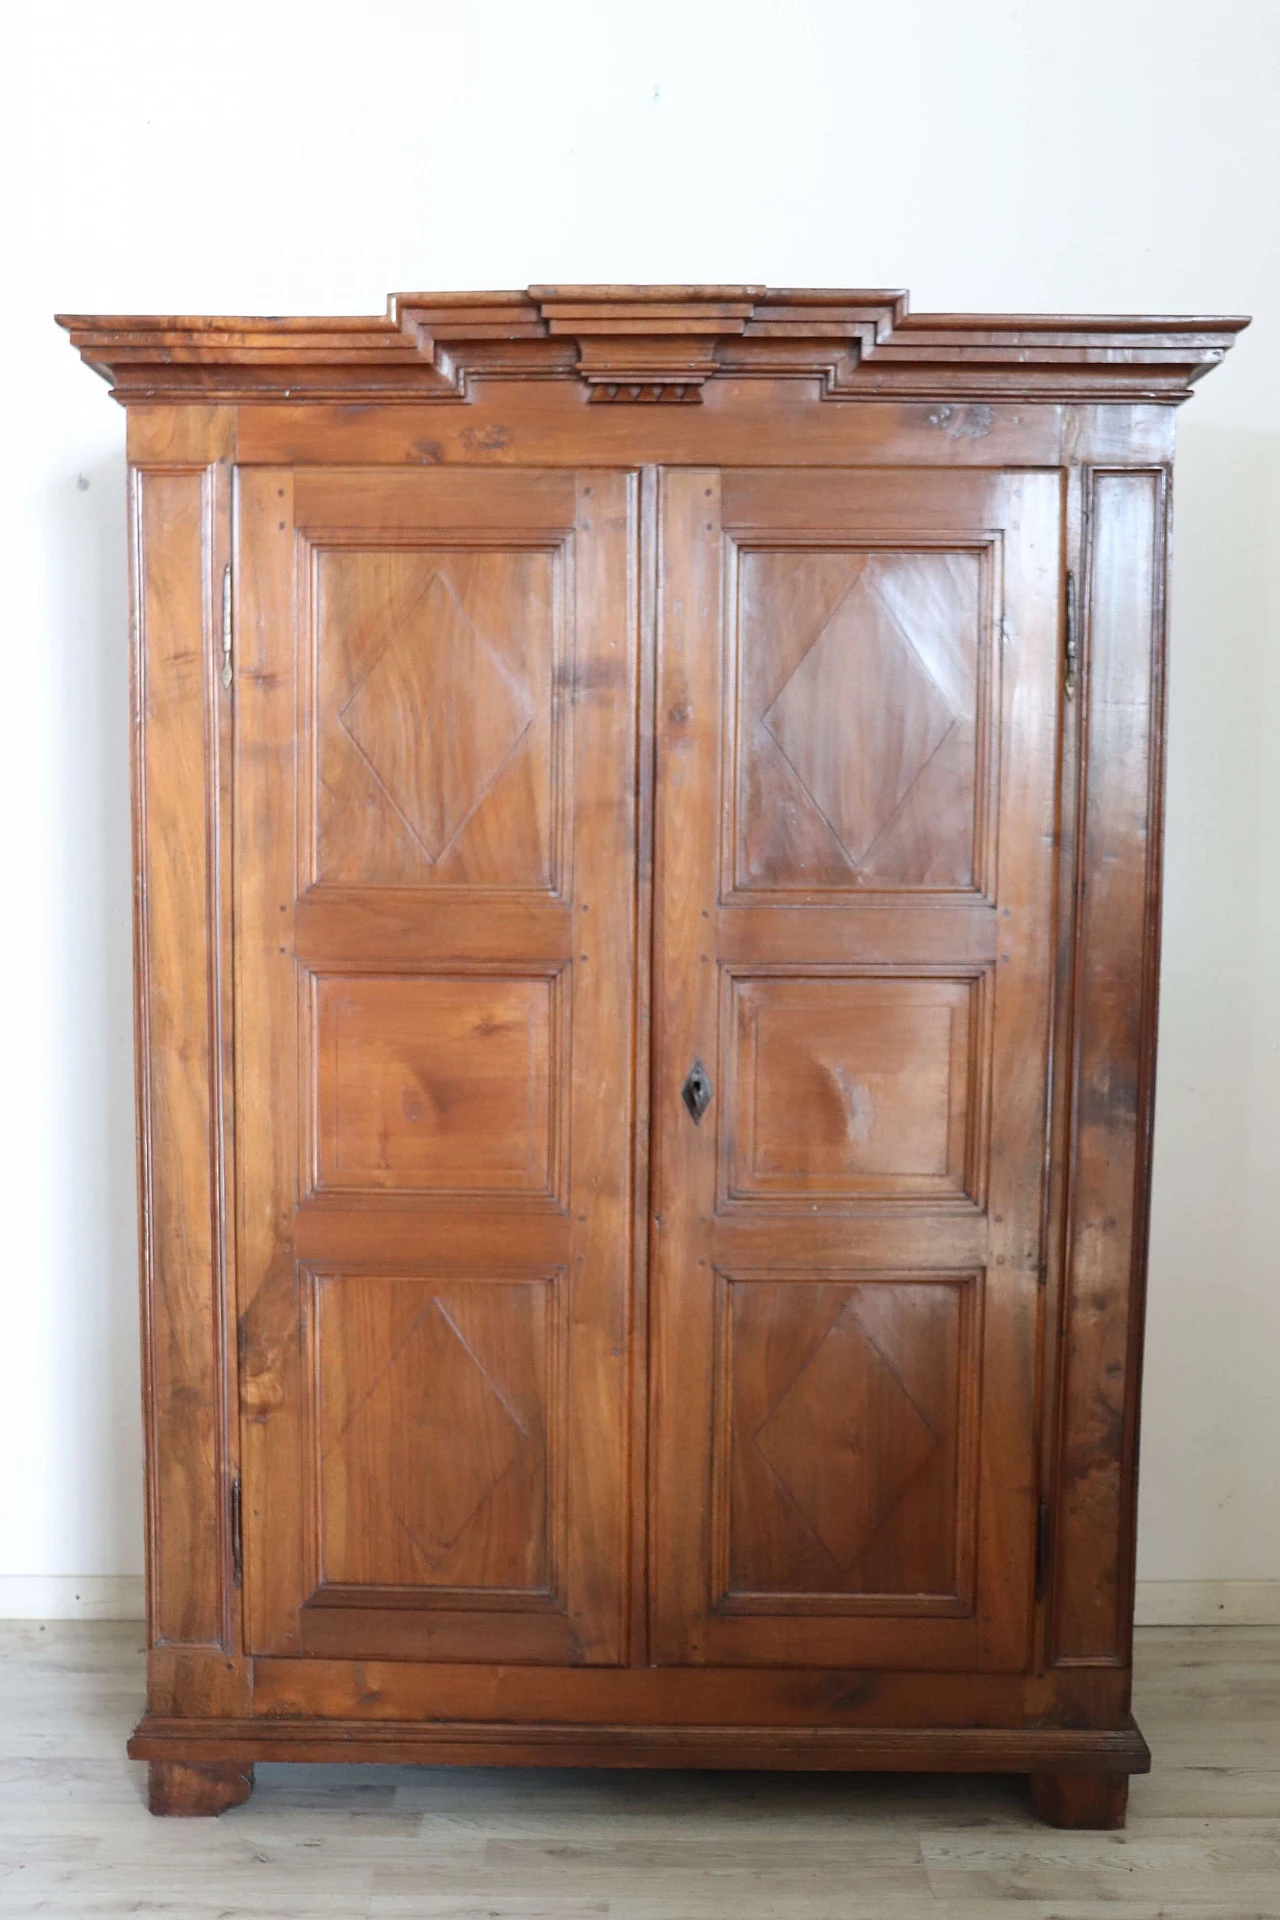 Solid walnut wardrobe with two doors, mid-18th century 16